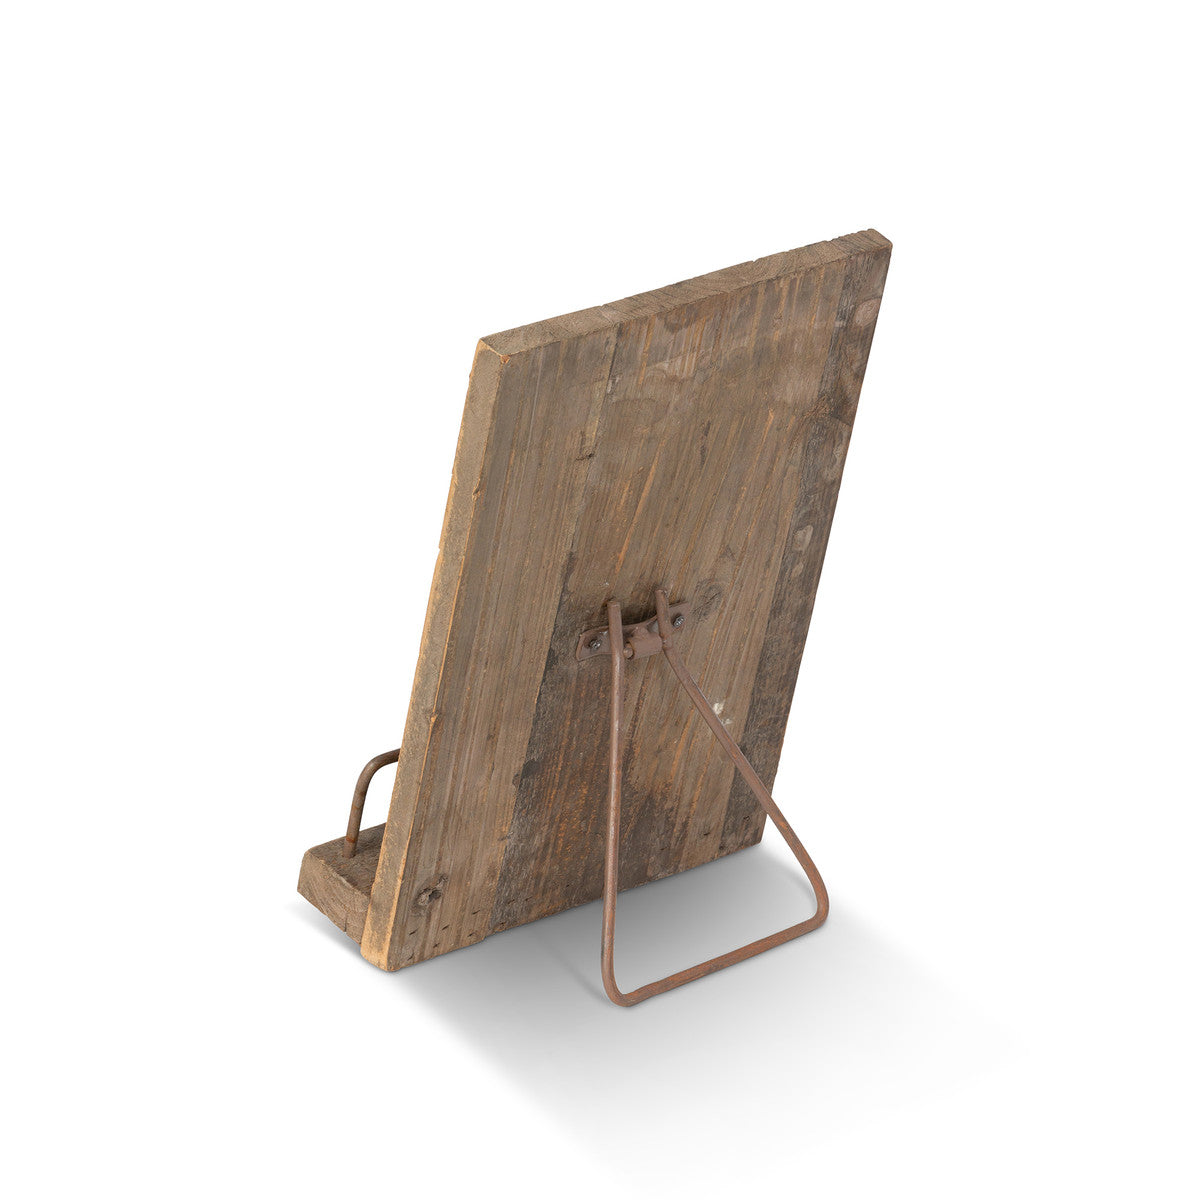 Rustic Farmhouse Kitchen Adjustable Cookbook Stand Display – High